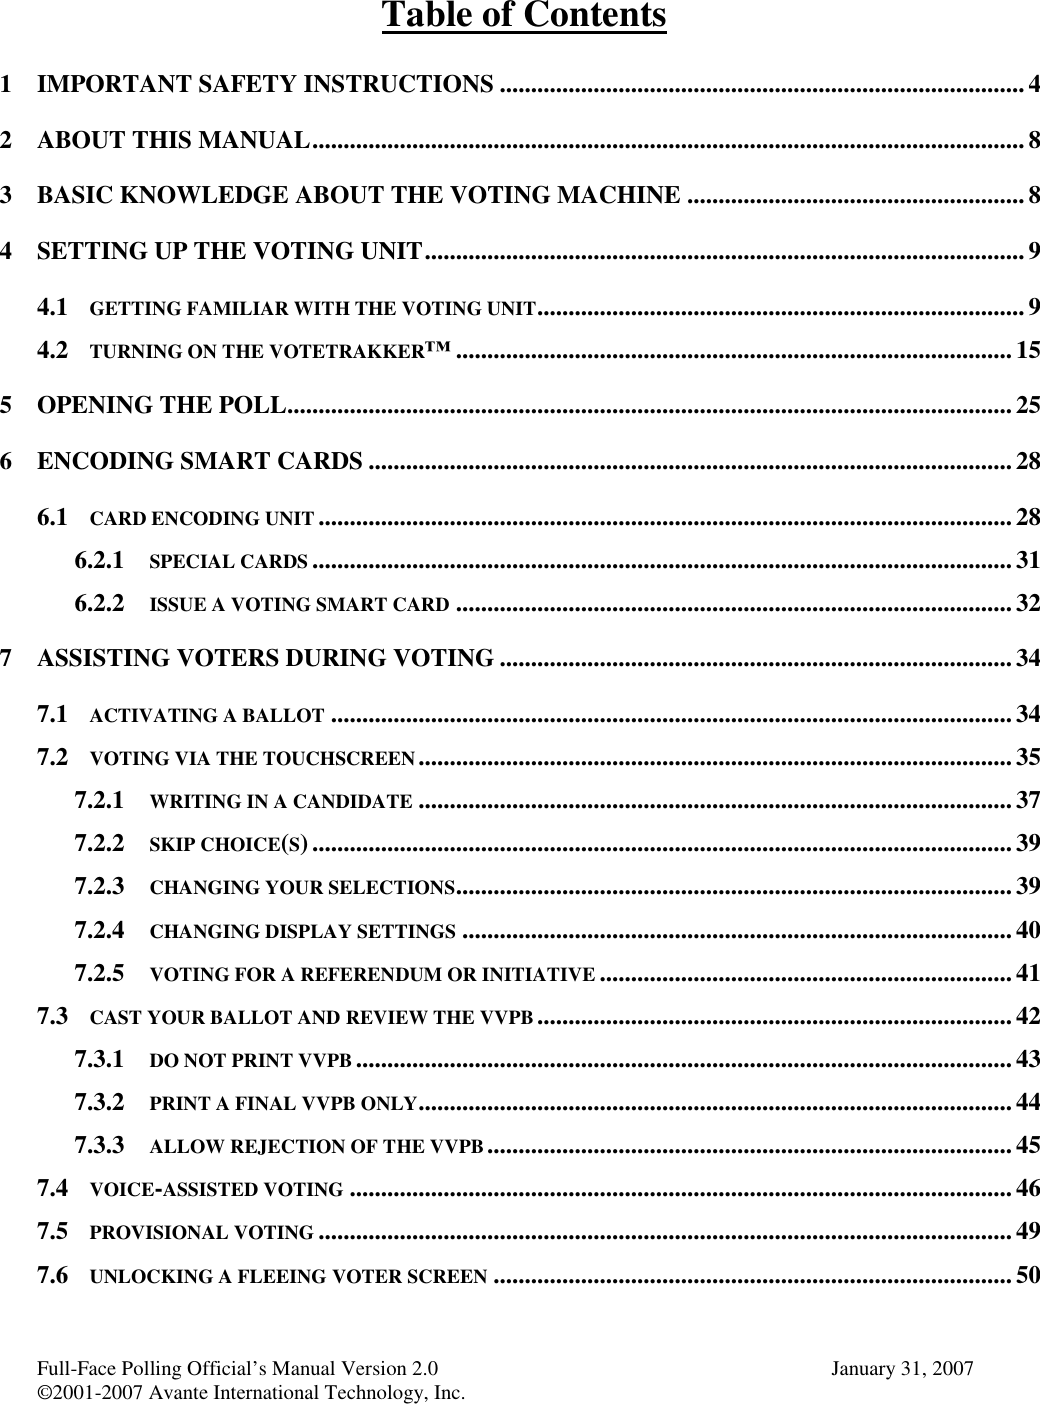 Full-Face Polling Official’s Manual Version 2.0 January 31, 2007©2001-2007 Avante International Technology, Inc.Table of Contents1 IMPORTANT SAFETY INSTRUCTIONS .................................................................................... 42 ABOUT THIS MANUAL.................................................................................................................. 83 BASIC KNOWLEDGE ABOUT THE VOTING MACHINE ......................................................84 SETTING UP THE VOTING UNIT................................................................................................94.1 GETTING FAMILIAR WITH THE VOTING UNIT.............................................................................. 94.2 TURNING ON THE VOTETRAKKER™......................................................................................... 155 OPENING THE POLL.................................................................................................................... 256 ENCODING SMART CARDS .......................................................................................................286.1 CARD ENCODING UNIT ............................................................................................................... 286.2.1 SPECIAL CARDS ................................................................................................................316.2.2 ISSUE A VOTING SMART CARD ......................................................................................... 327 ASSISTING VOTERS DURING VOTING .................................................................................. 347.1 ACTIVATING A BALLOT .............................................................................................................347.2 VOTING VIA THE TOUCHSCREEN...............................................................................................357.2.1 WRITING IN A CANDIDATE ............................................................................................... 377.2.2 SKIP CHOICE(S)................................................................................................................ 397.2.3 CHANGING YOUR SELECTIONS.........................................................................................397.2.4 CHANGING DISPLAY SETTINGS ........................................................................................ 407.2.5 VOTING FOR A REFERENDUM OR INITIATIVE .................................................................. 417.3 CAST YOUR BALLOT AND REVIEW THE VVPB ............................................................................427.3.1 DO NOT PRINT VVPB .........................................................................................................437.3.2 PRINT A FINAL VVPB ONLY............................................................................................... 447.3.3 ALLOW REJECTION OF THE VVPB.................................................................................... 457.4 VOICE-ASSISTED VOTING .......................................................................................................... 467.5 PROVISIONAL VOTING ...............................................................................................................497.6 UNLOCKING A FLEEING VOTER SCREEN ................................................................................... 50